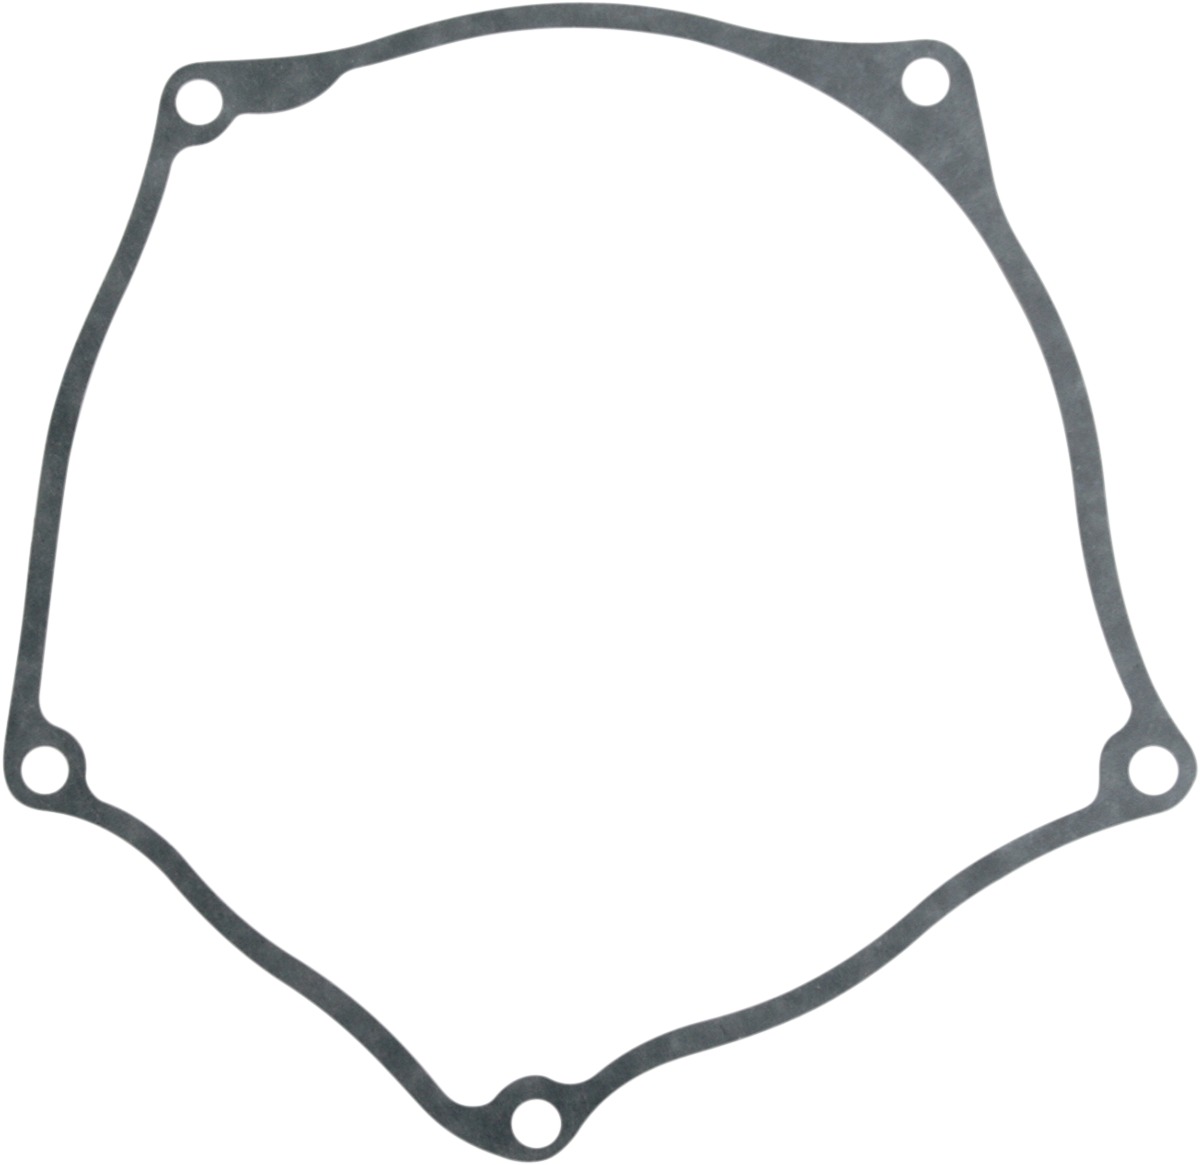 Outer Clutch Cover Gasket - For 09-20 Kawasaki KX250F - Click Image to Close